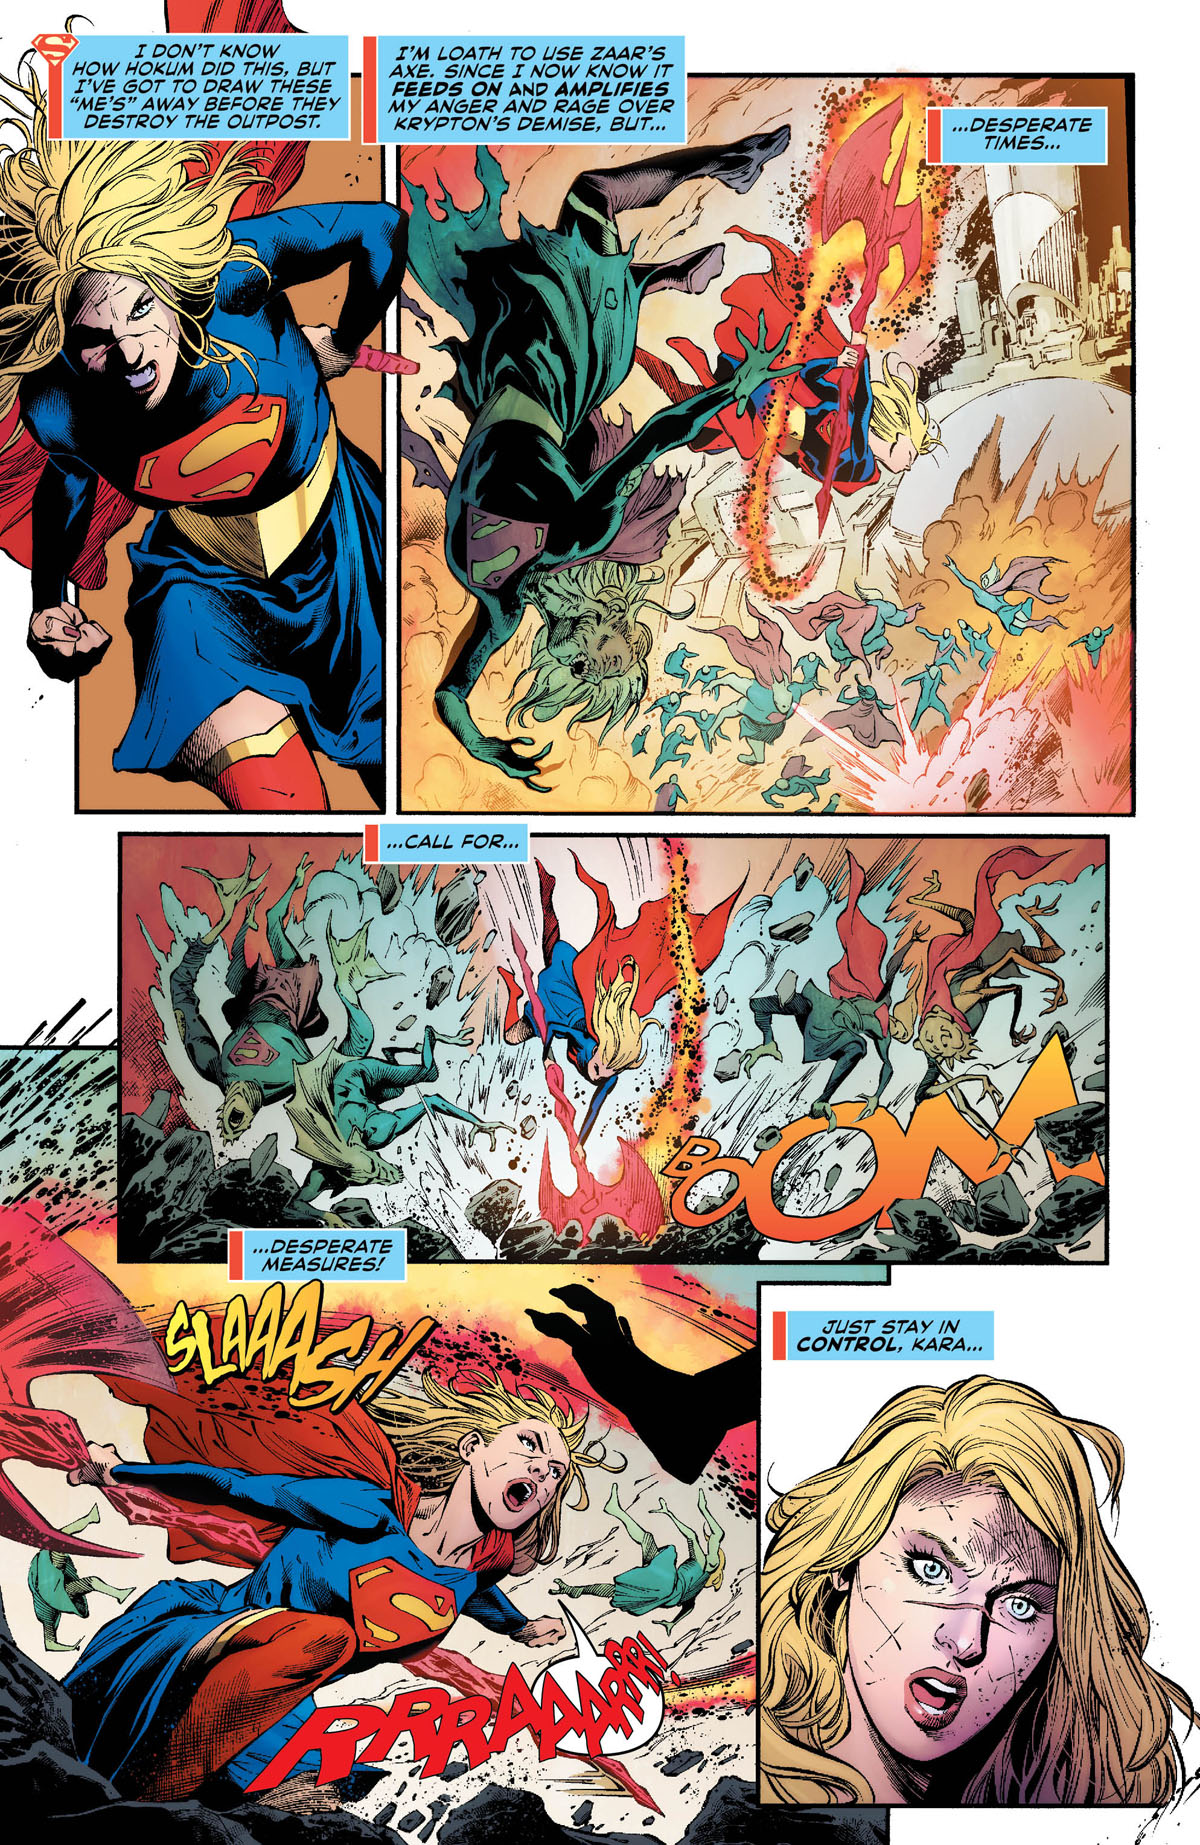 Supergirl #28 page 5